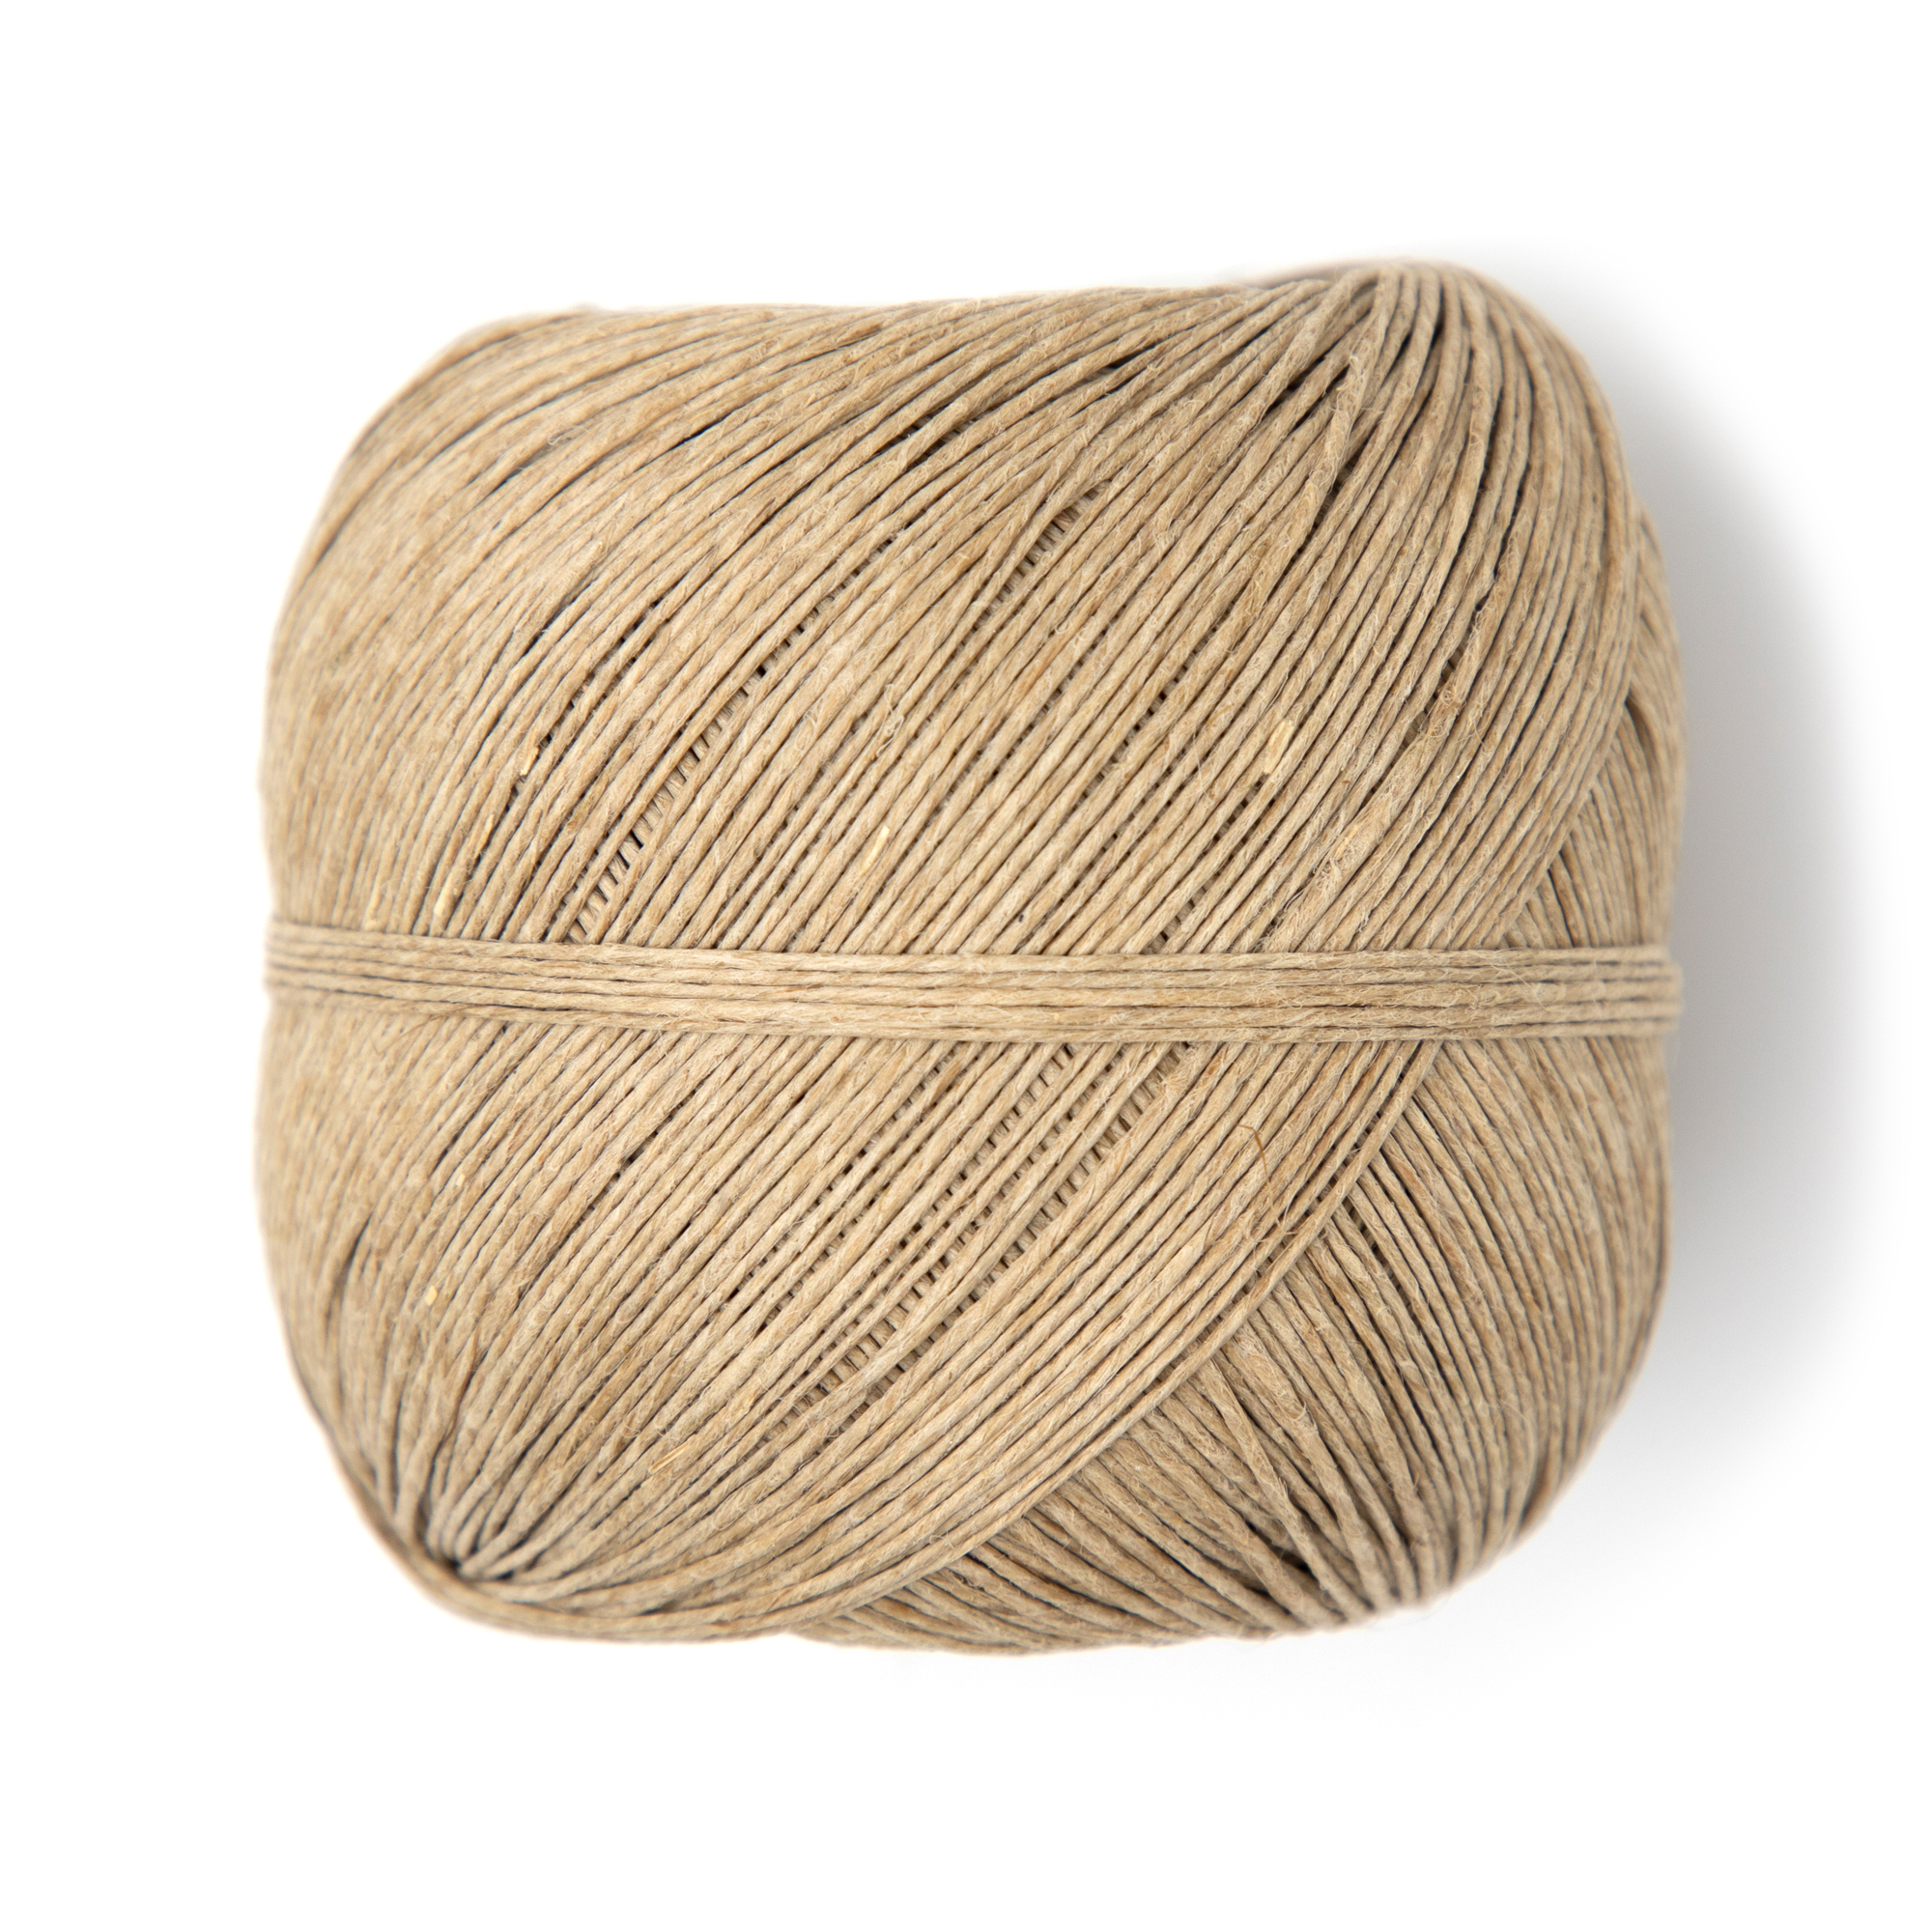 Cousin DIY 10 lb Thin Polished Hemp Cord Twine, 400 ft, Natural Brown - image 1 of 8